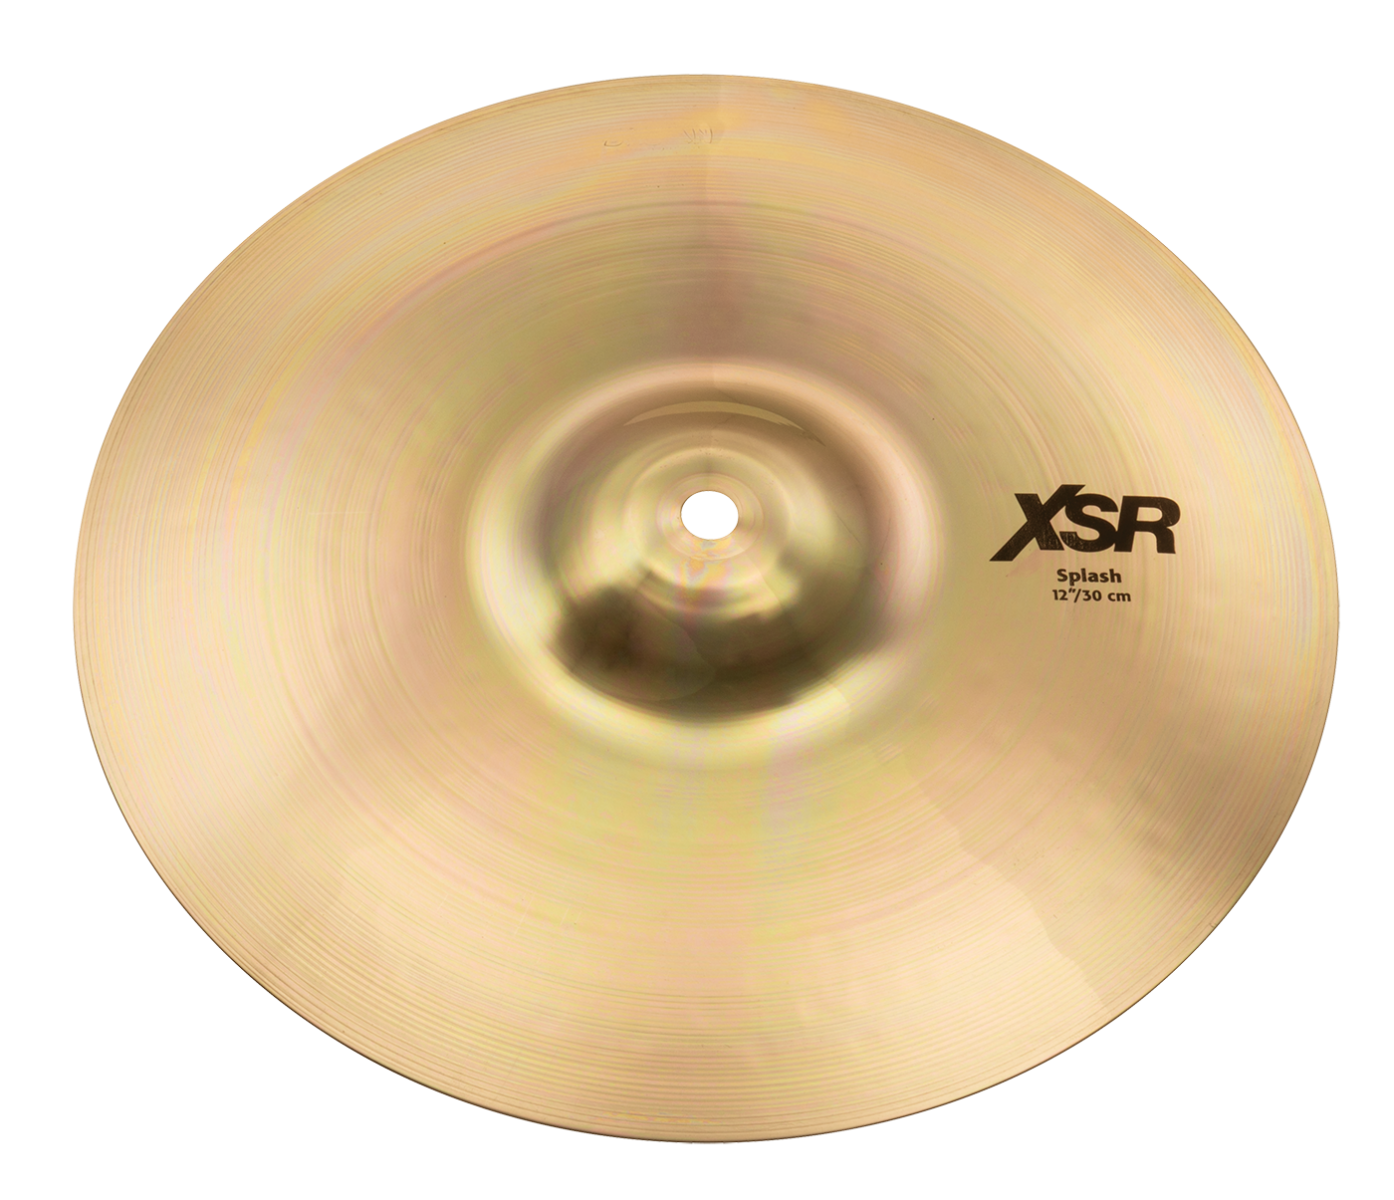 XSR Archives - Page 3 of 3 - SABIAN Cymbals